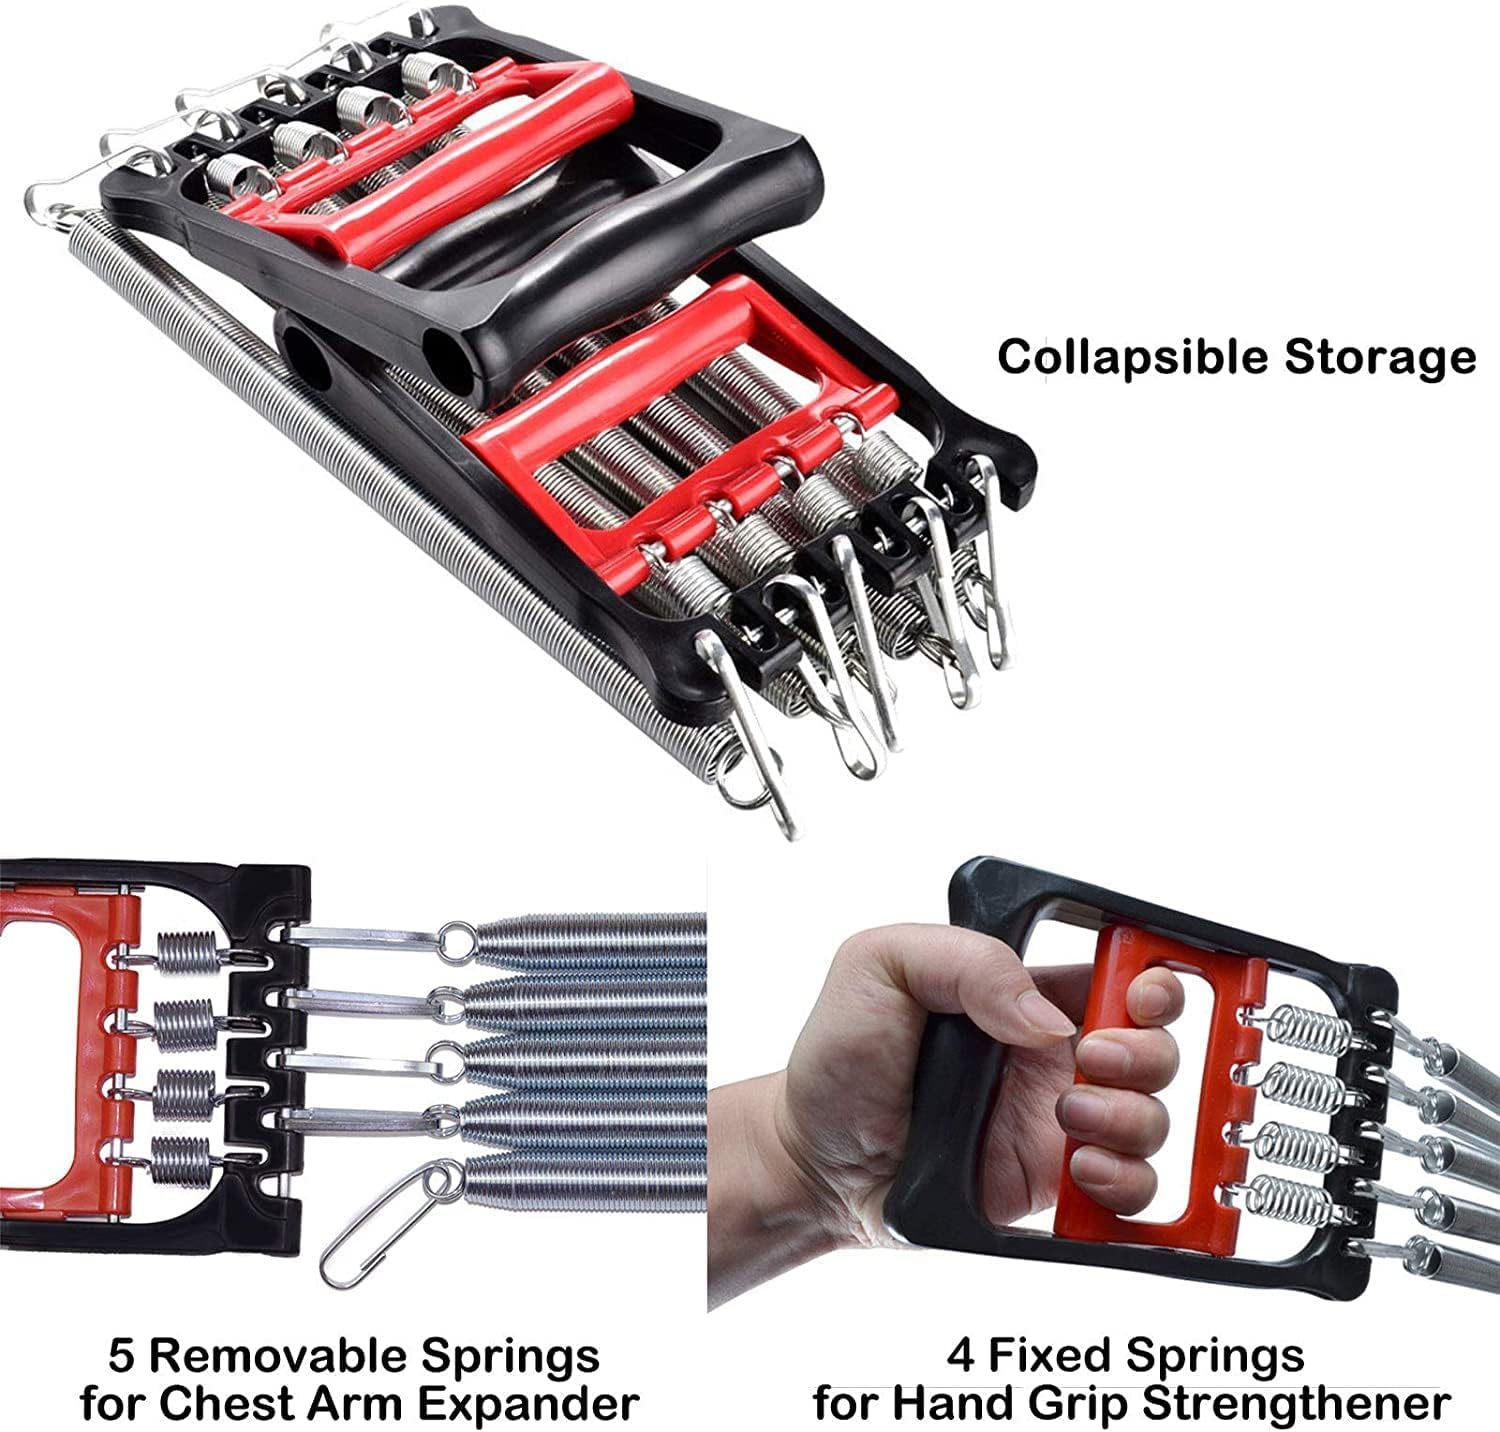 HighTech Go 3 in 1 Exerciser - Chest Expander, Hand Grip Strengthener, Pedal Pull Rope Band Home Fitness Equipment with 5 Metal Spring for Finger Abdomen Waist Arm Stretching Slimming Training, Black